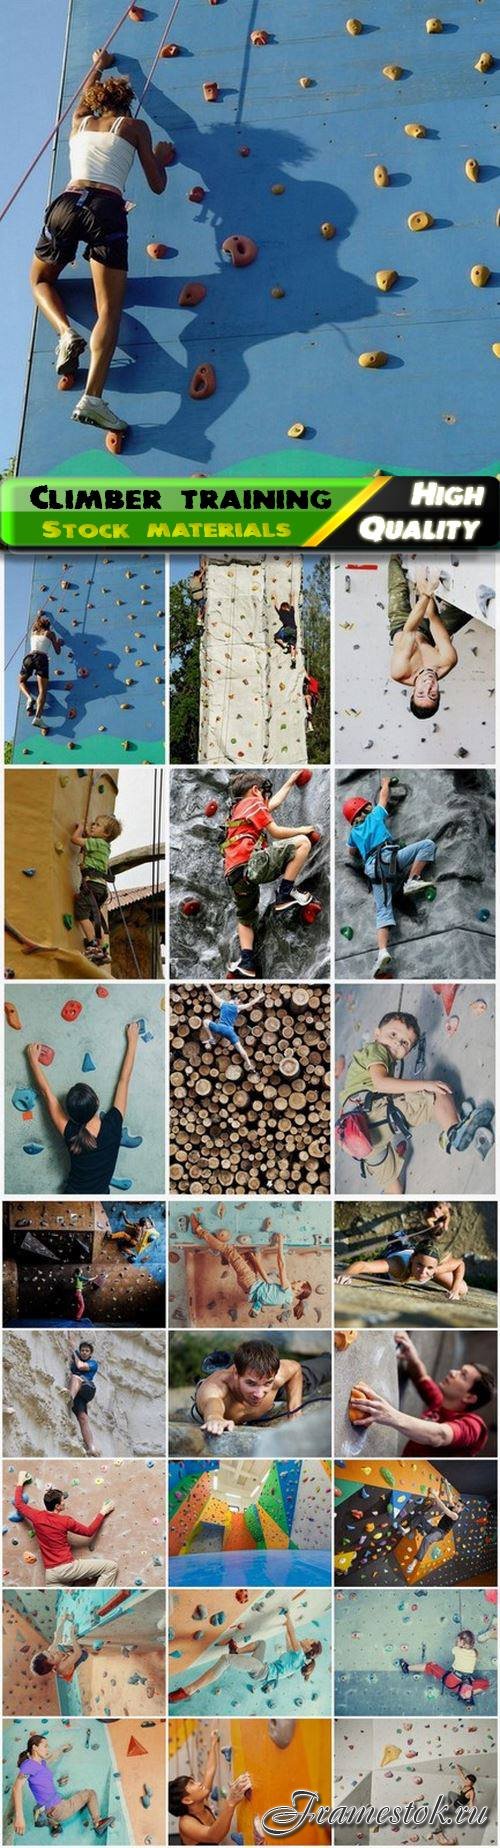 Extreme sport and man and woman climber training - 25 HQ Jpg